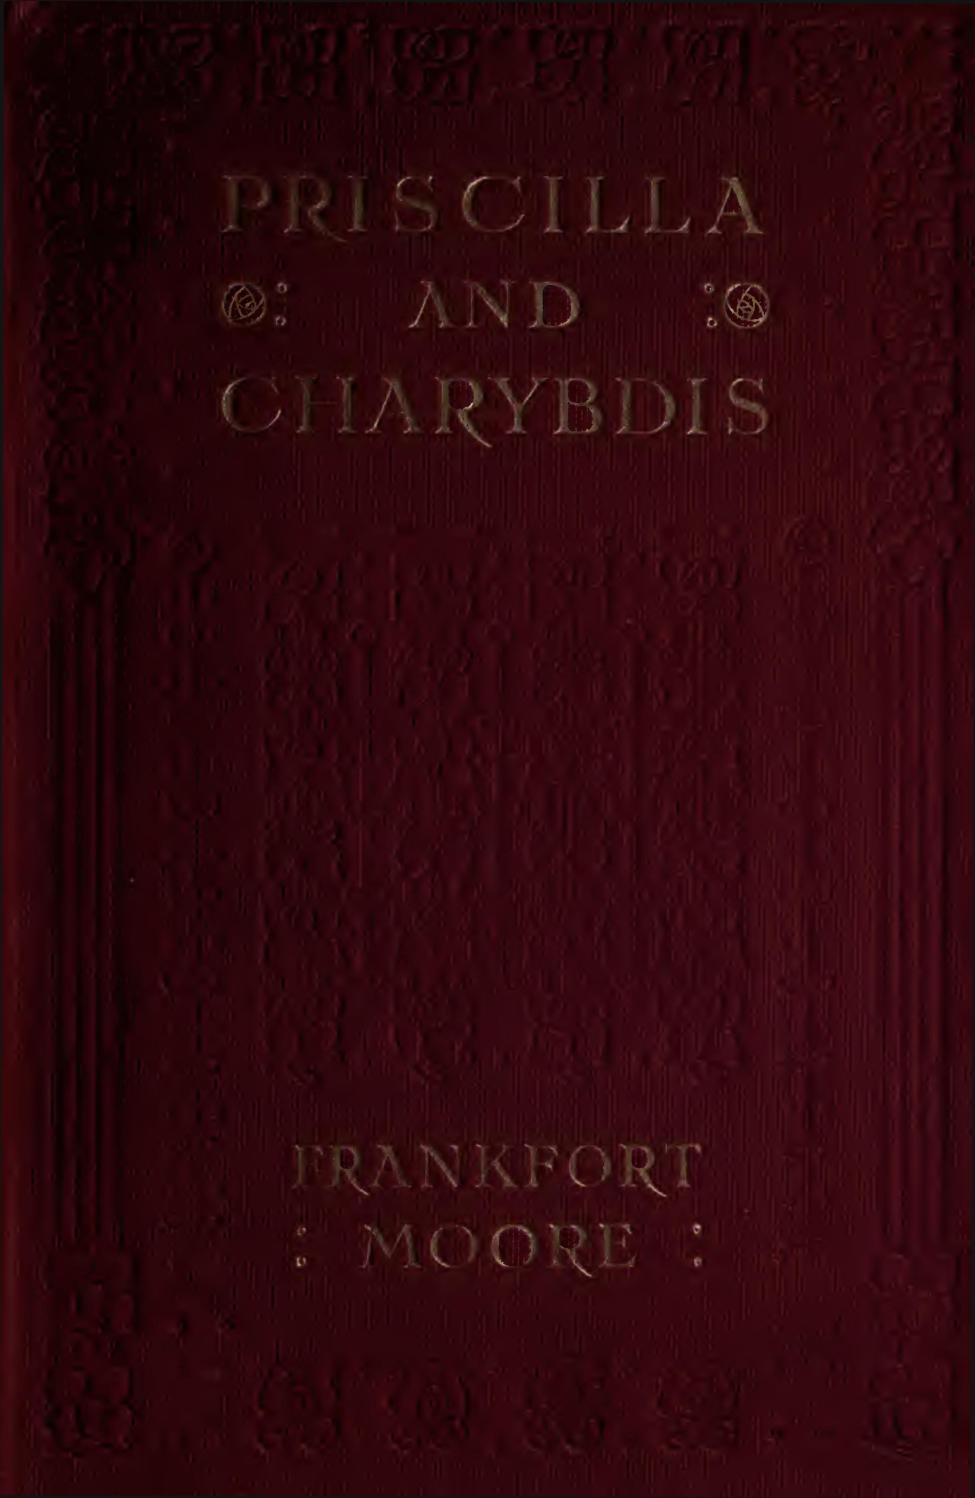 Priscilla and Charybdis, by Frank Frankfort Moore photo